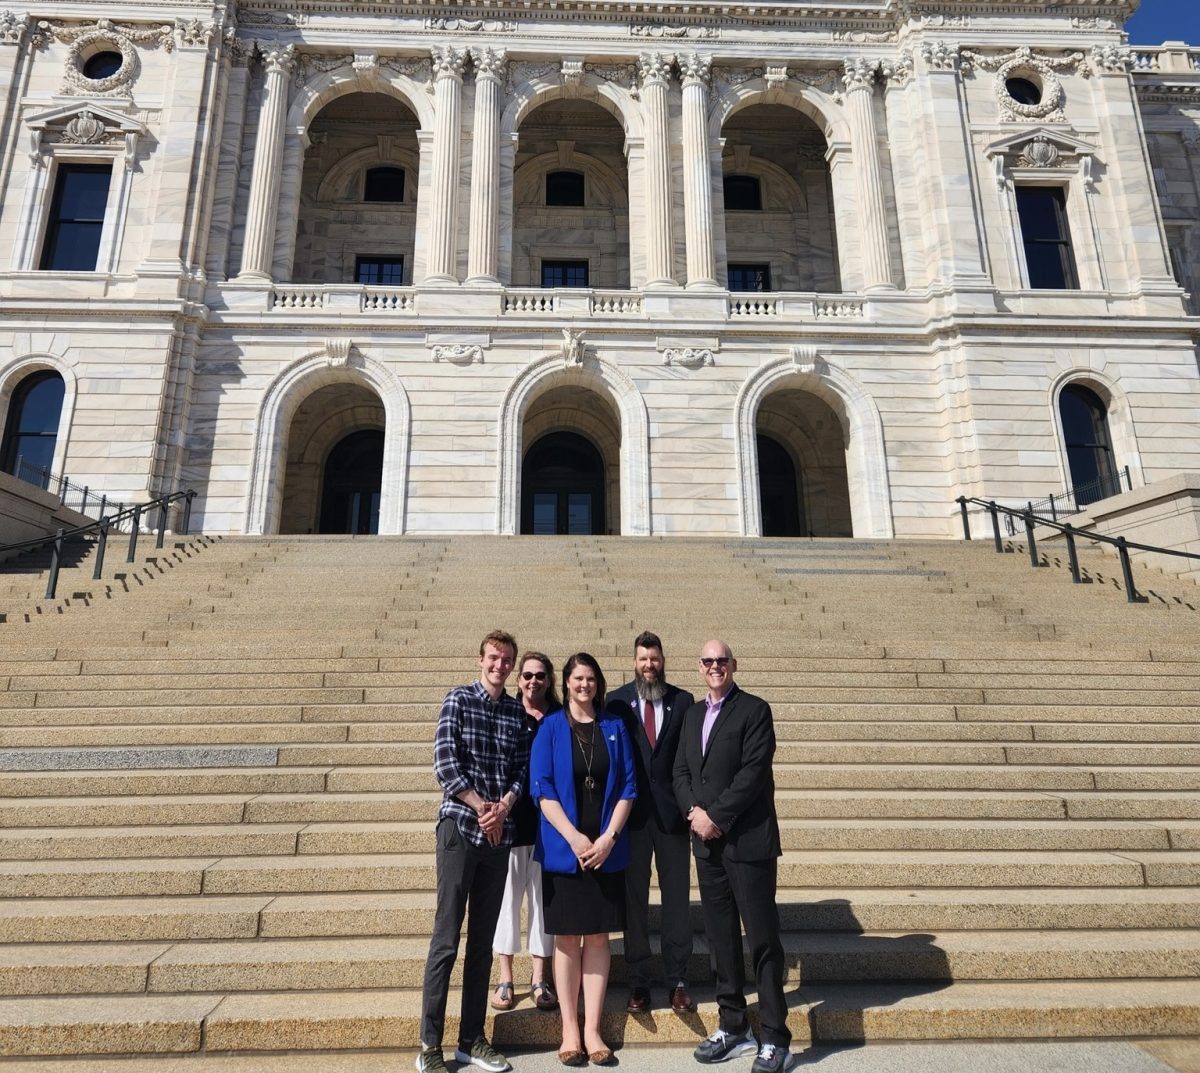 Members of the American Foundation for Suicide Prevention on State Capitol Day in Minnesota. April 9 is State Capitol Day, a day to advocate for new legislation surrounding mental health.